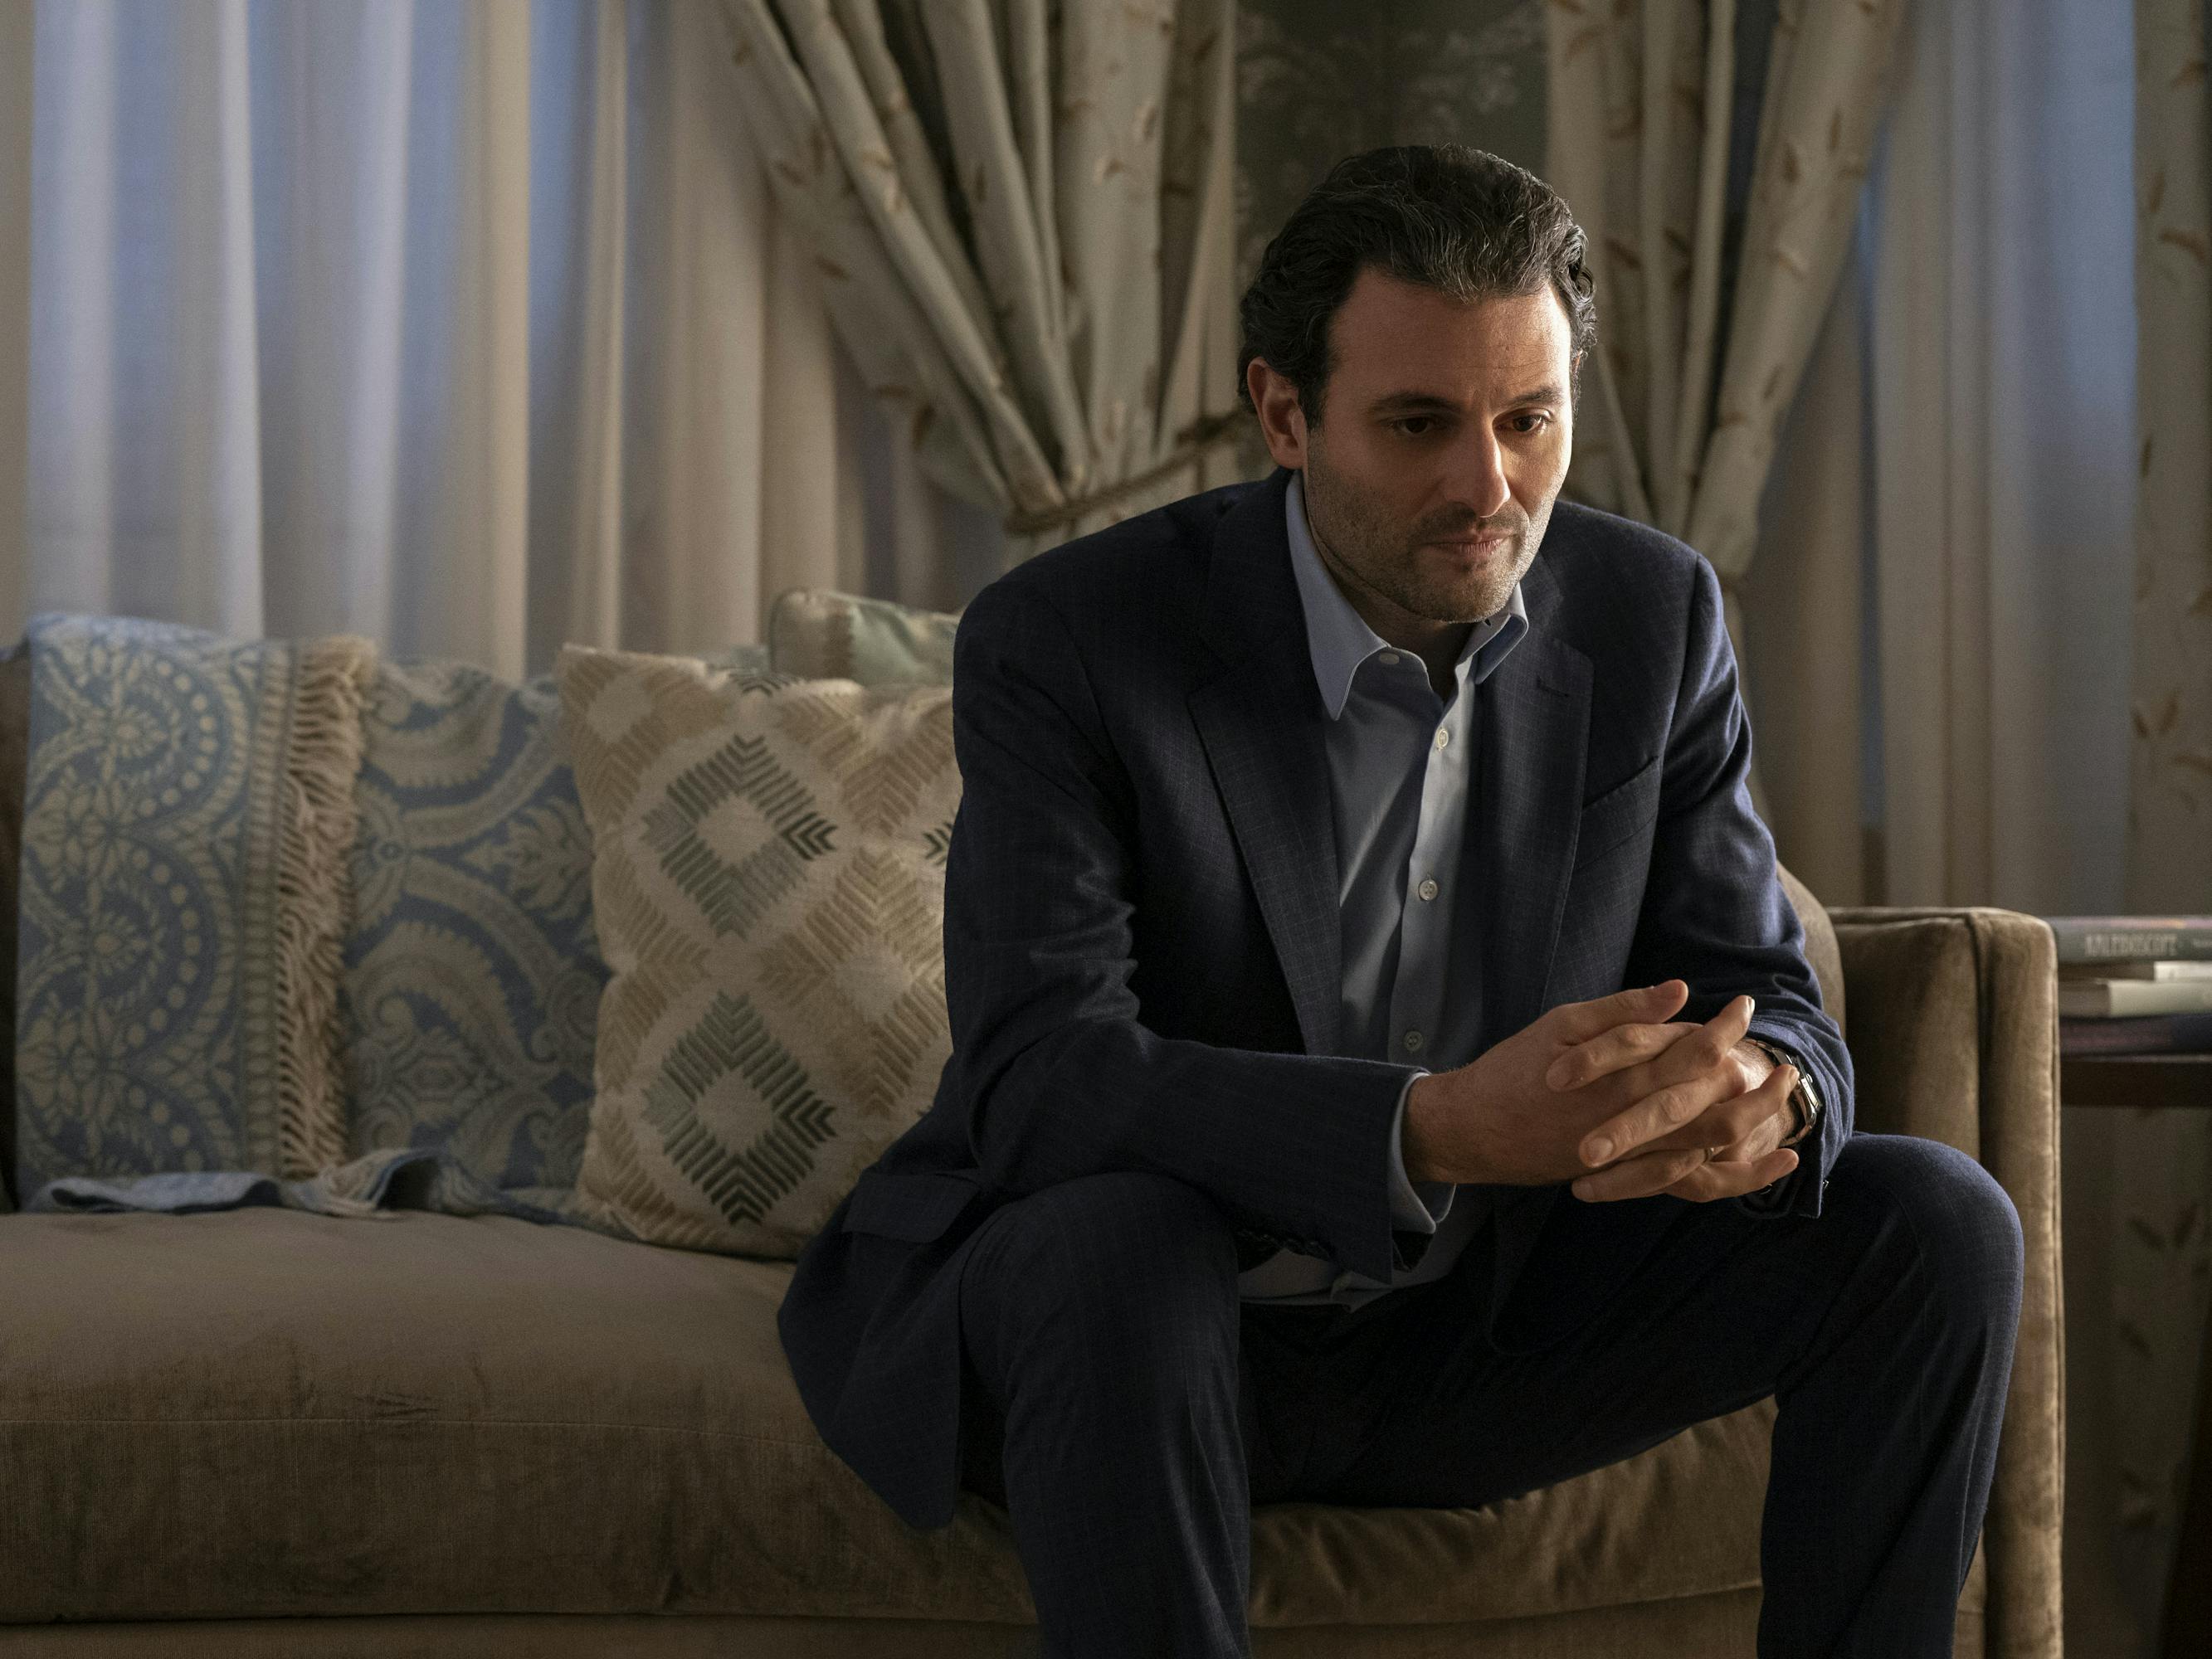 Todd Spodek (Arian Moayed) wears a suit and sits on a beige couch. 